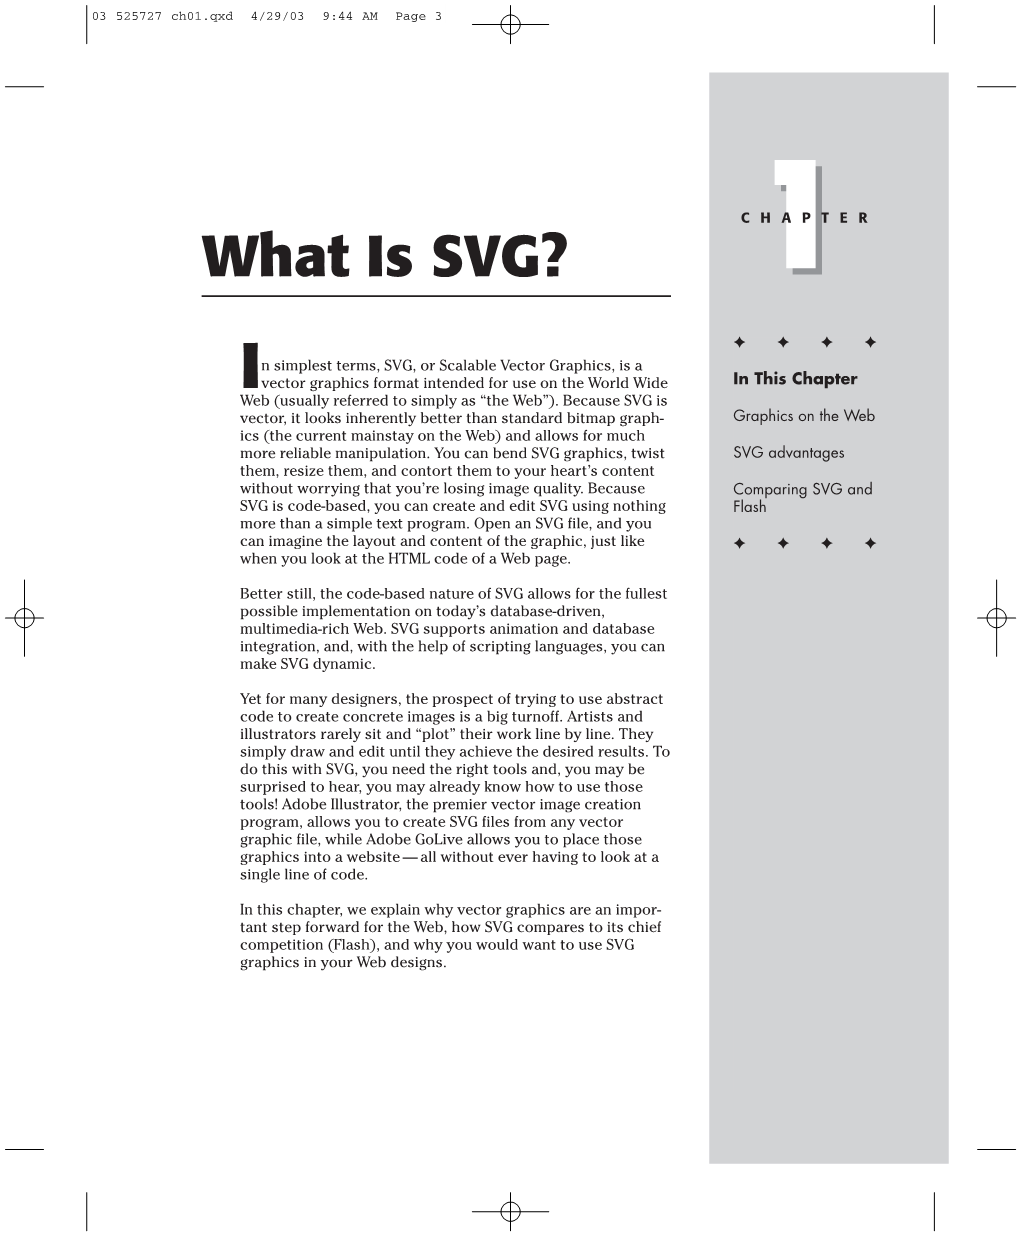 What Is SVG? 11